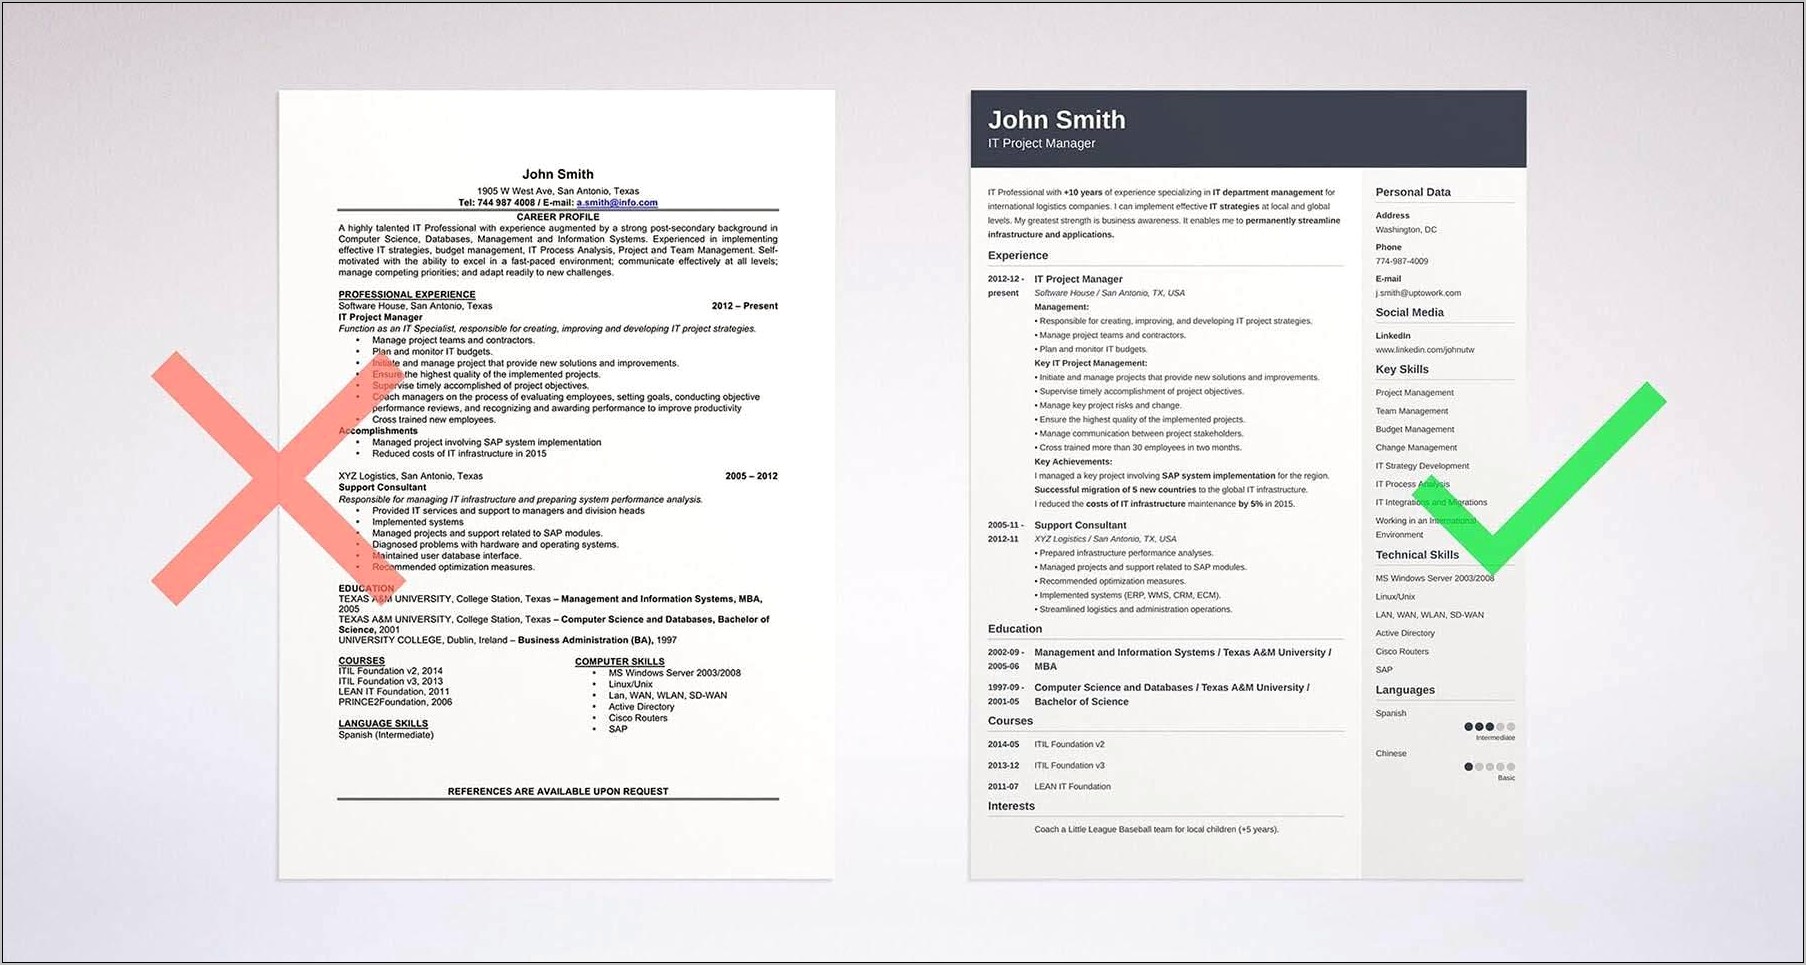 General Resume Objective With No Company Name